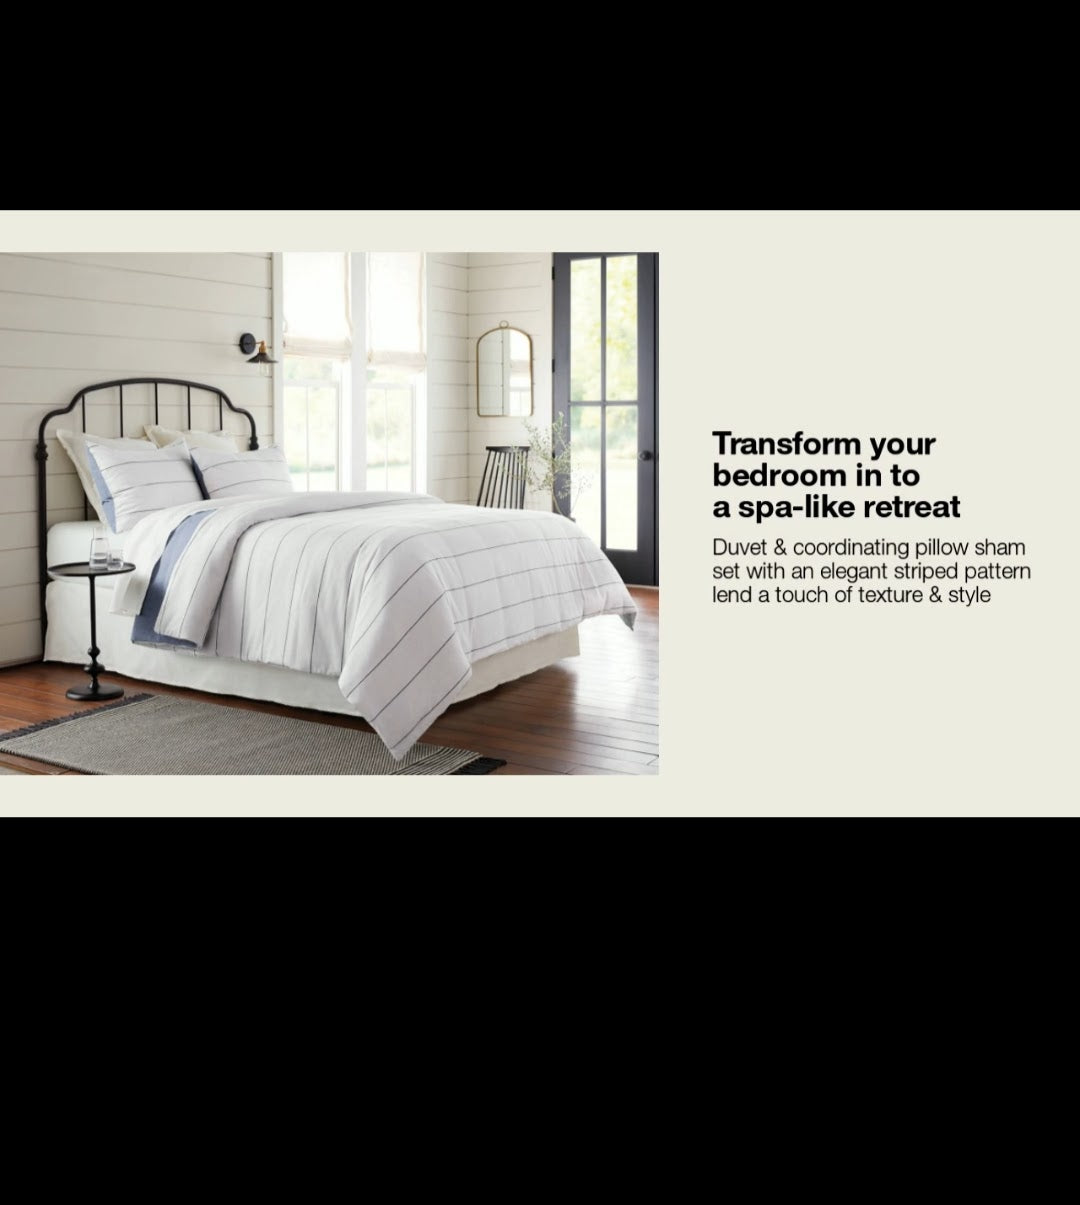 Hearth and Hand Magnolia Home TWIN DUVET SET 65in x 88in